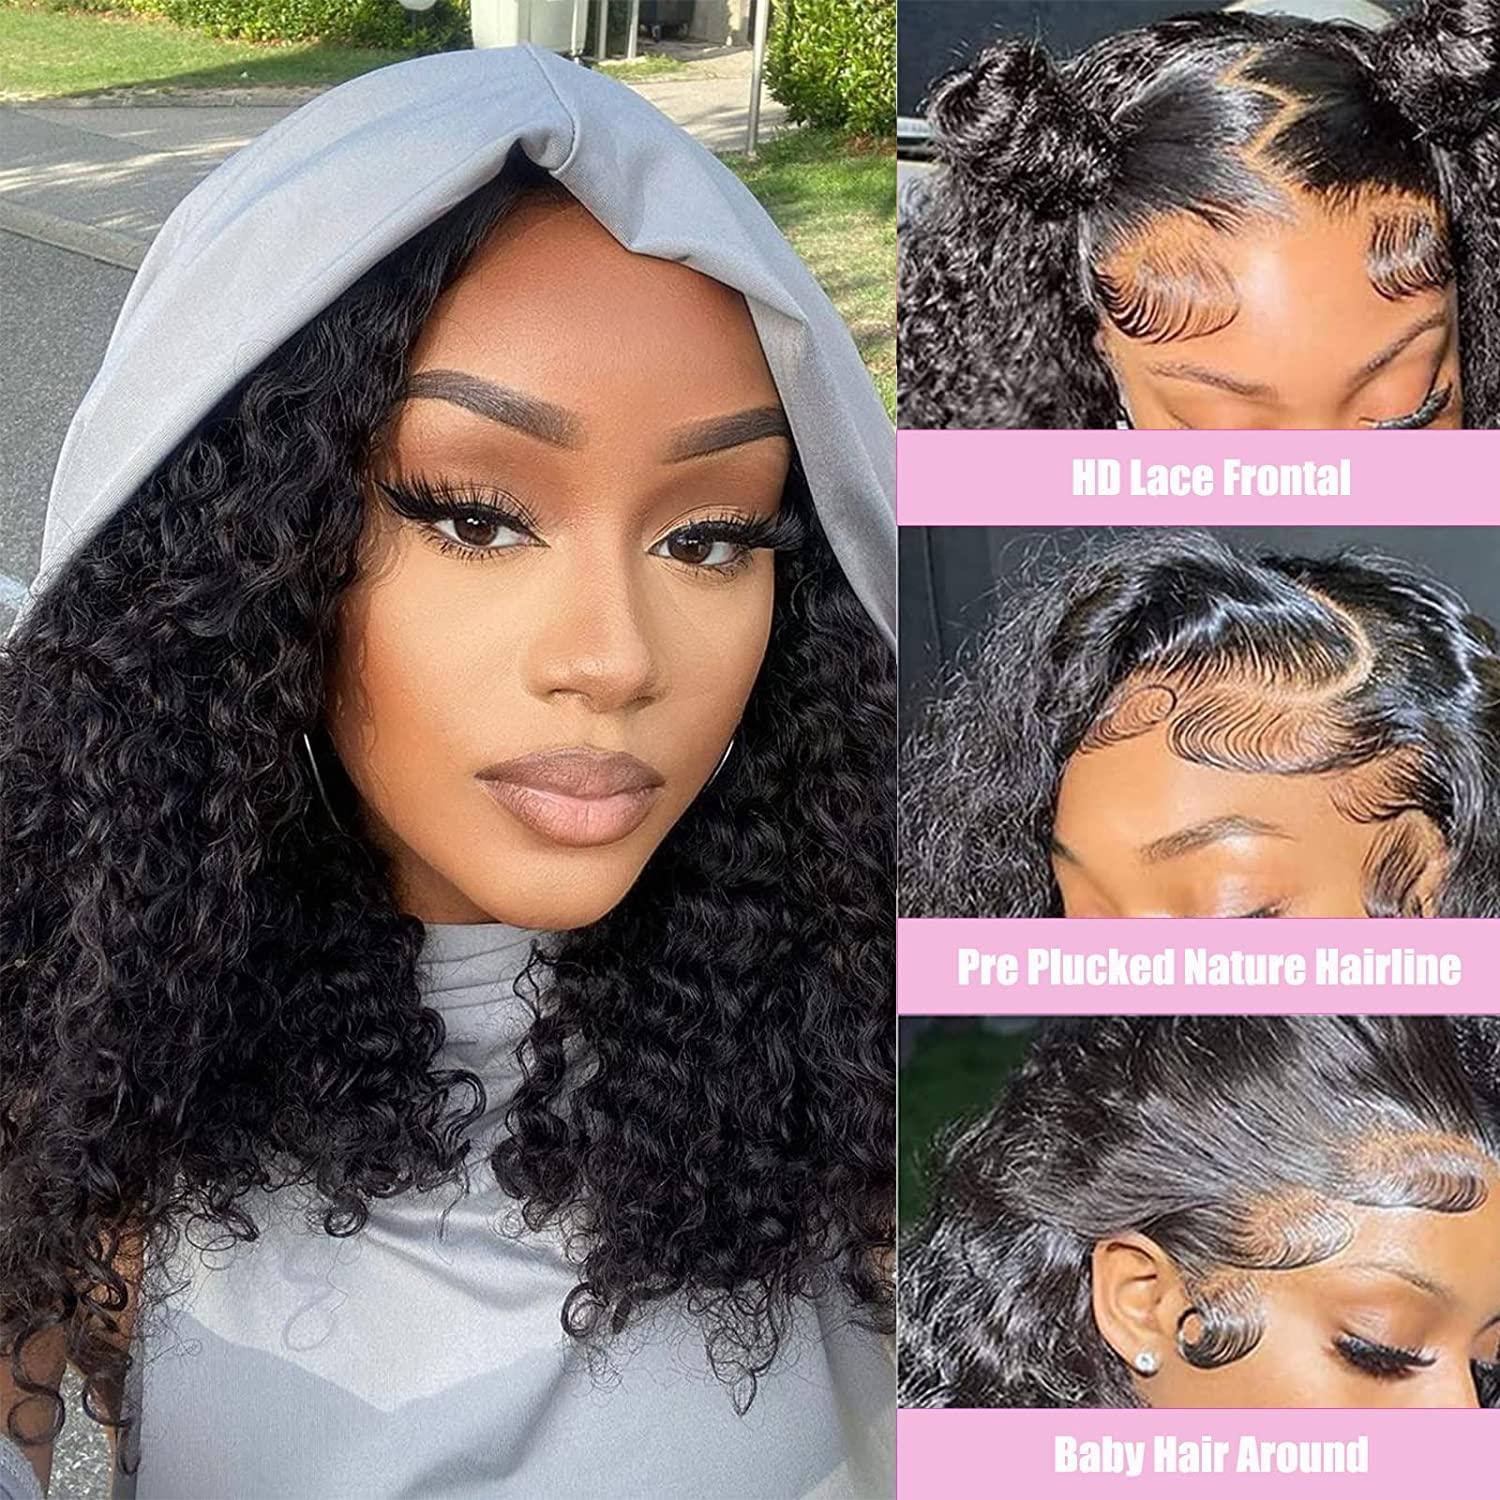 Emilyhair TTNC kinkycurly Short Bob 13x4 Jerry Curly Glueless Kinky Curly Lace Front Wigs 14 Inch